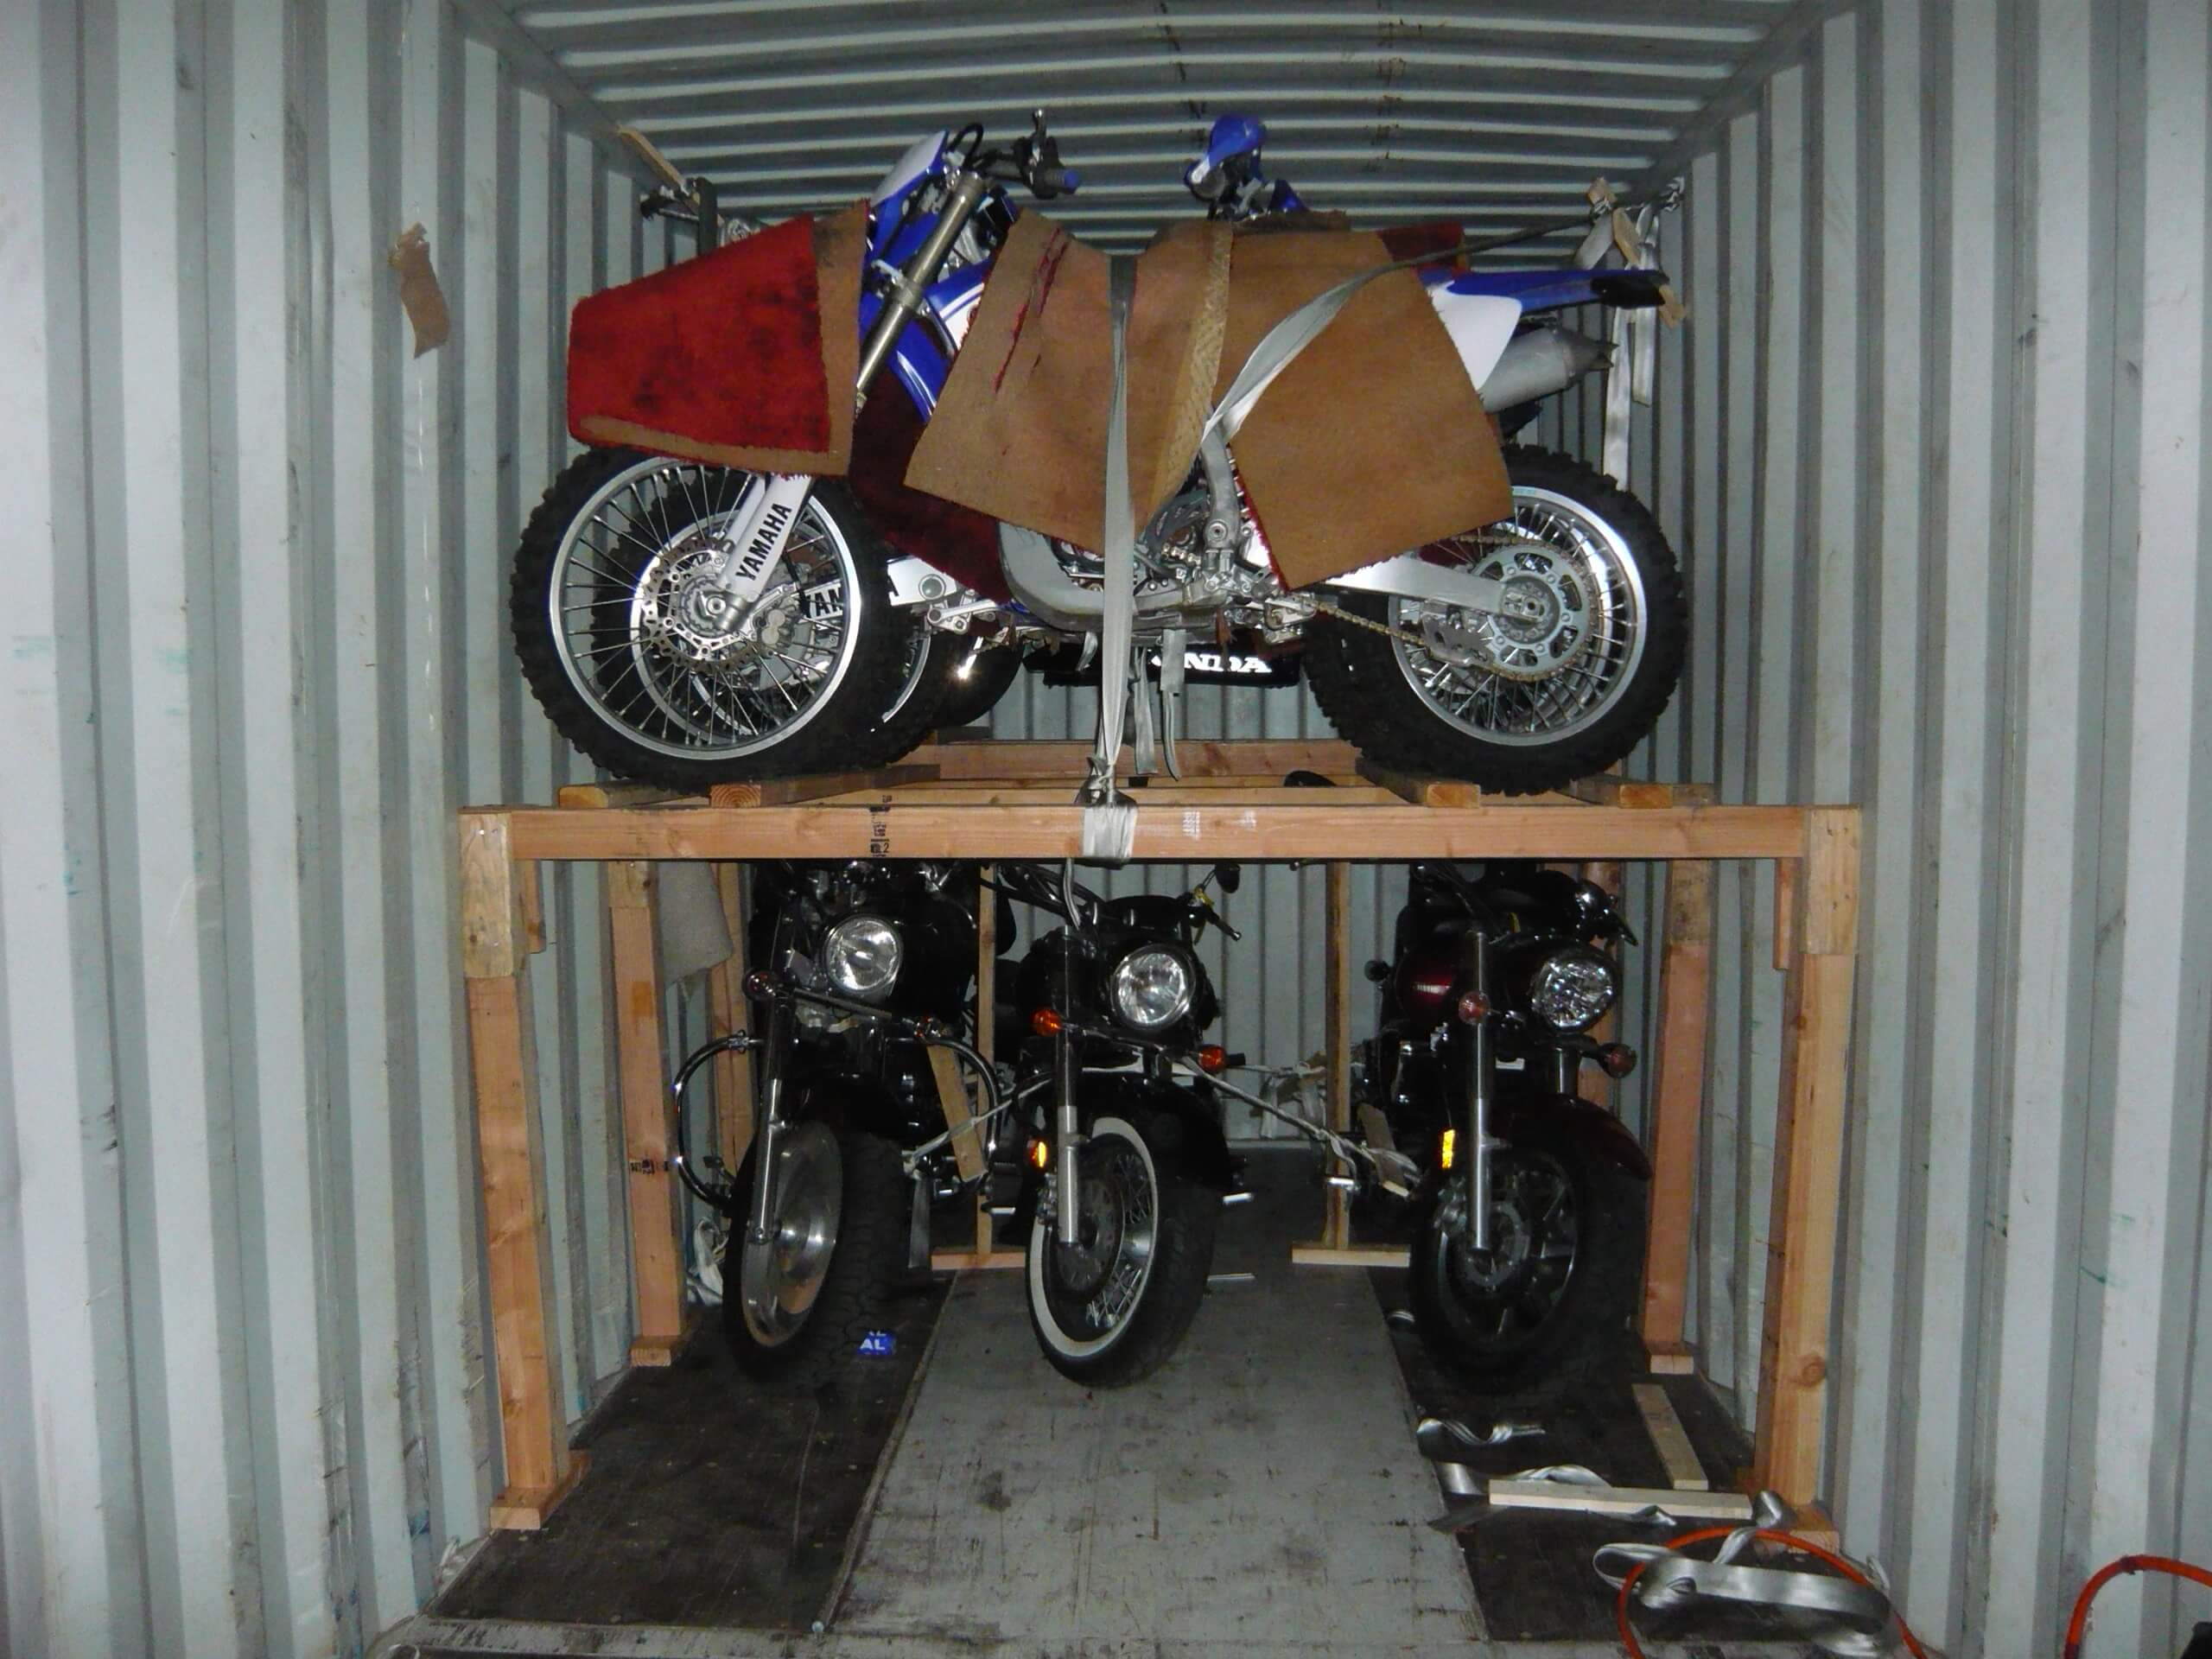 Motorcycle shipping container with wooden braces.